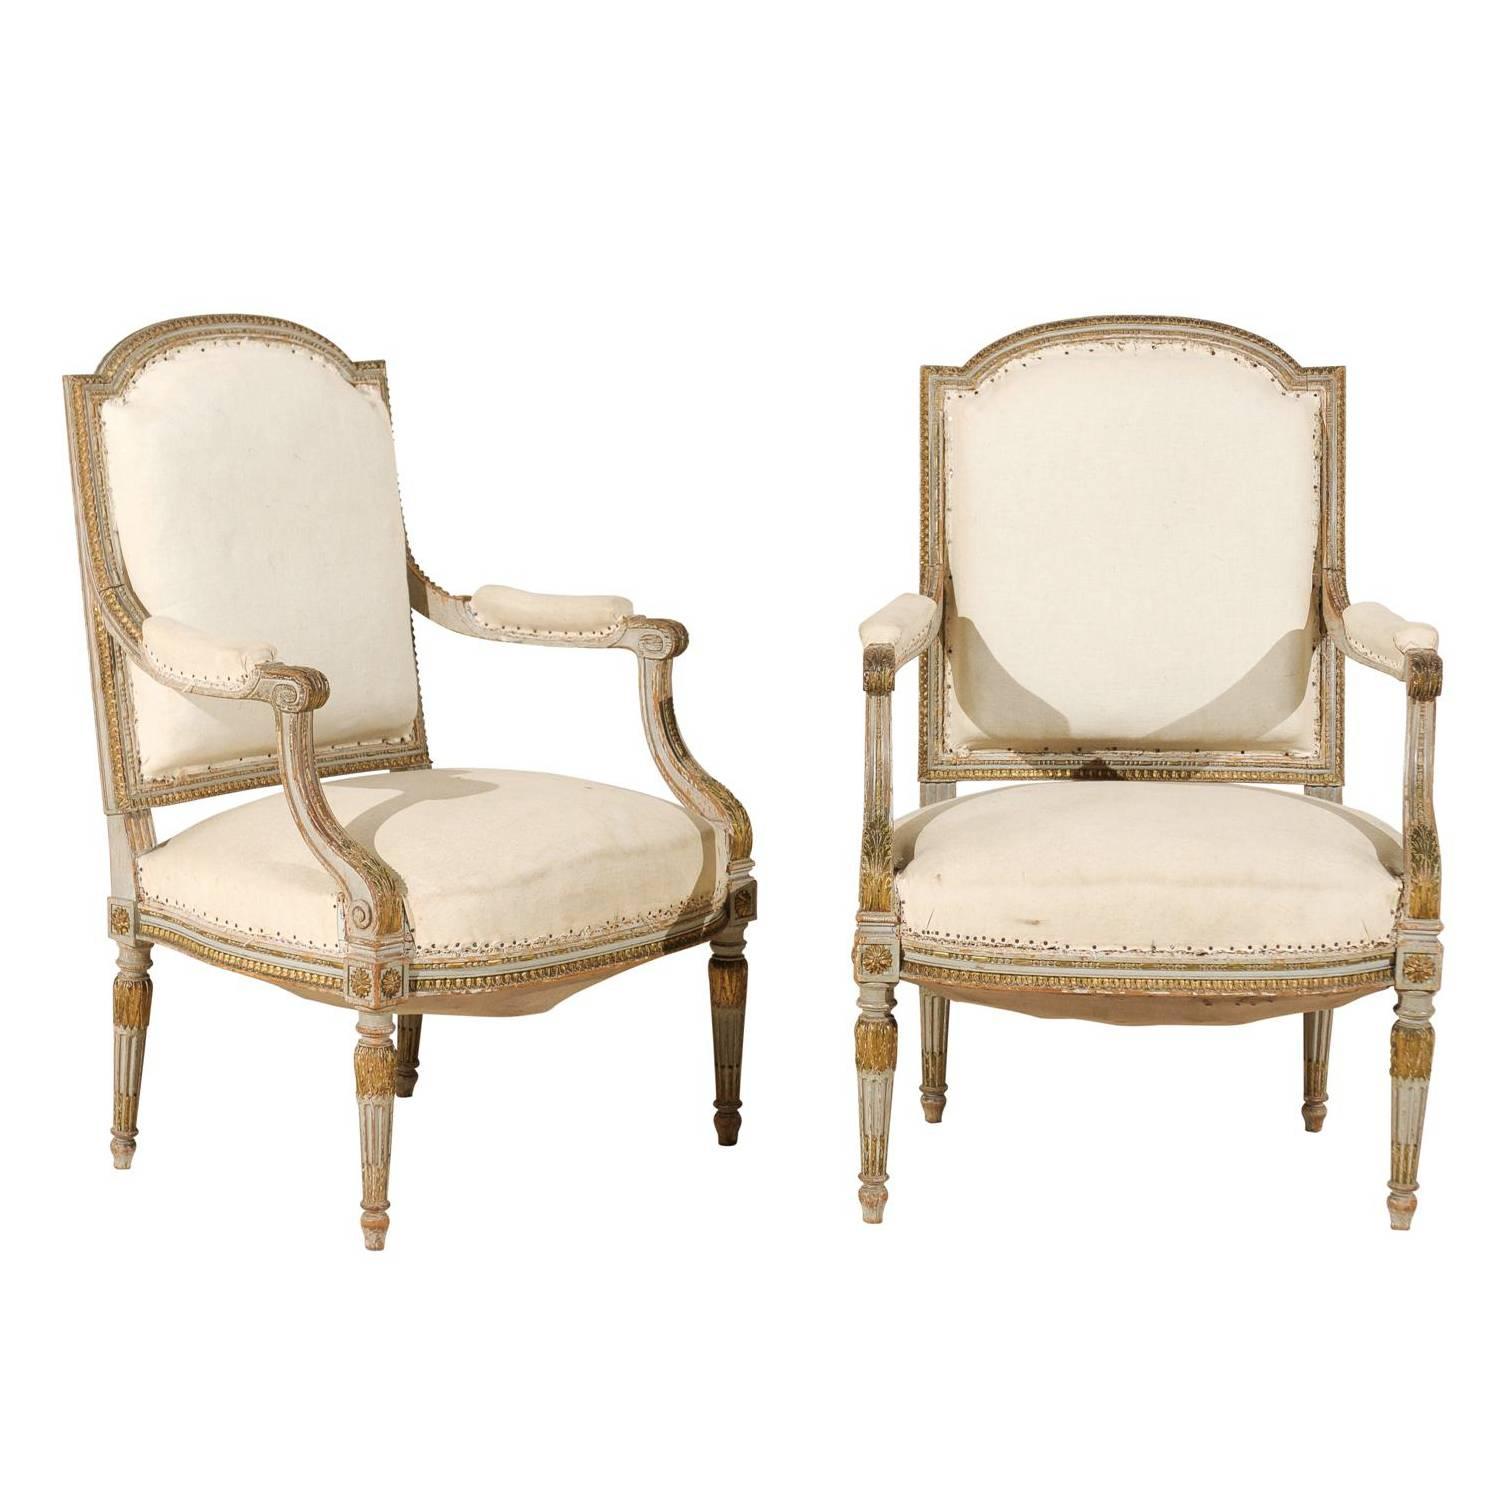 Pair of 19th Century French Louis XVI Style Fauteuils or Armchairs